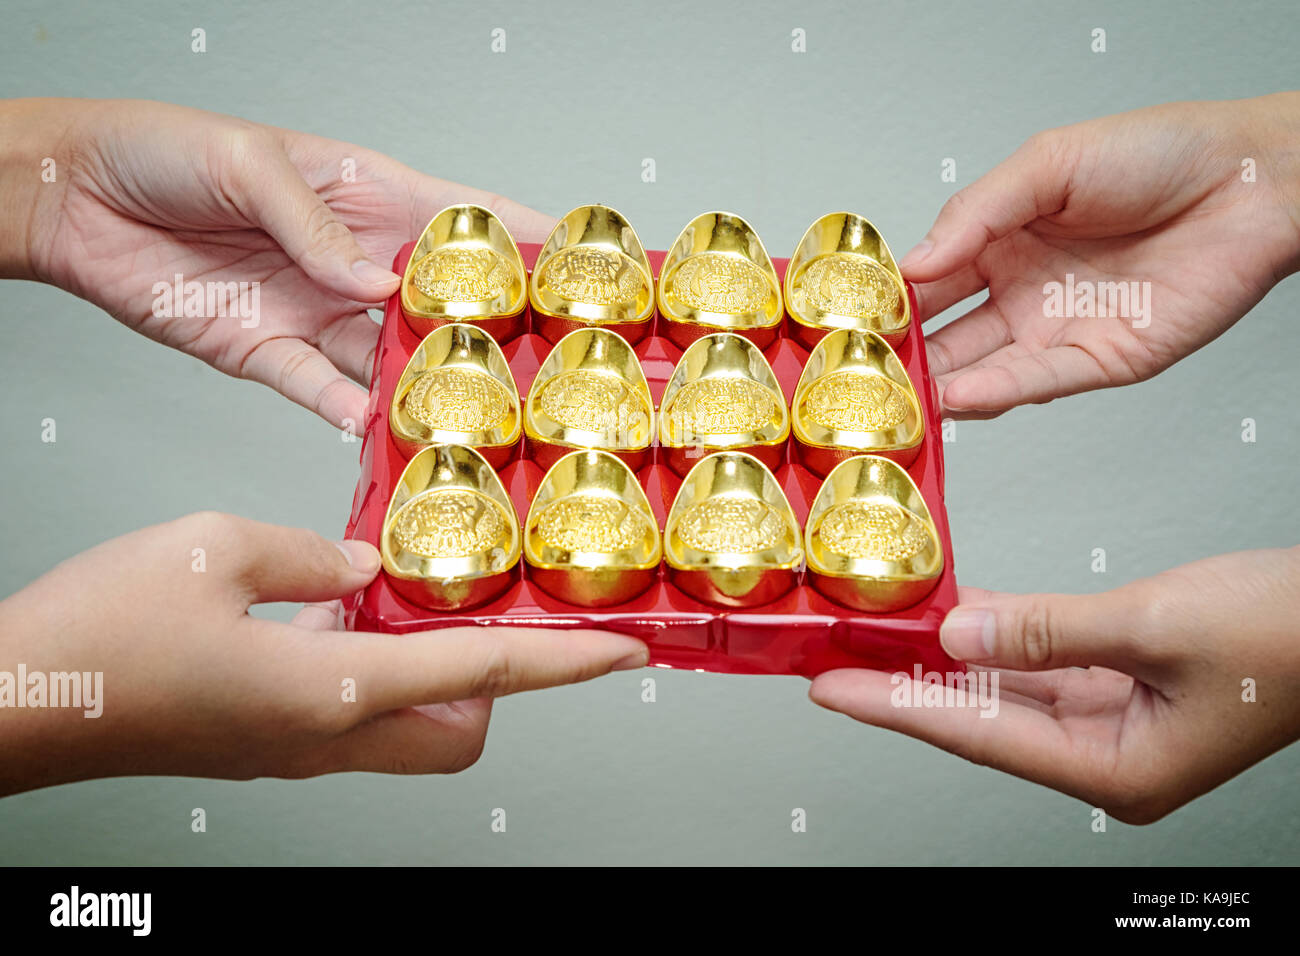 Hand giving gold ingot to someone for Chinese New Year celebration Stock Photo